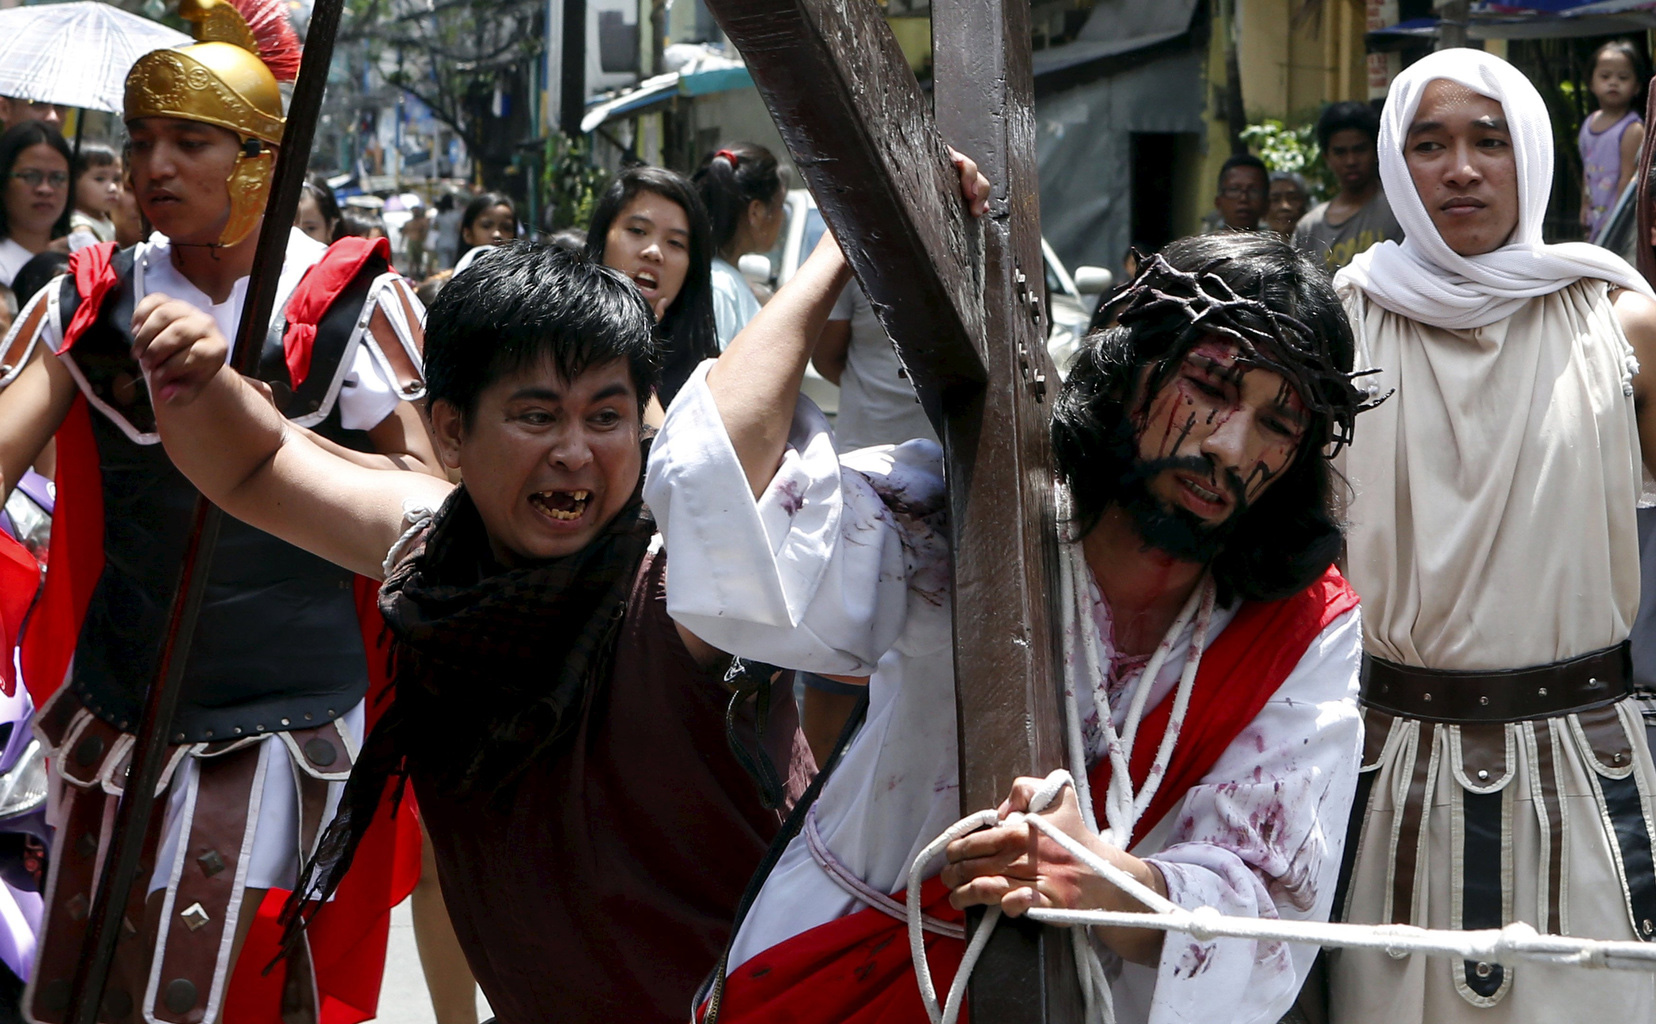 Holy Week and Easter traditions hold prominent place in Philippine